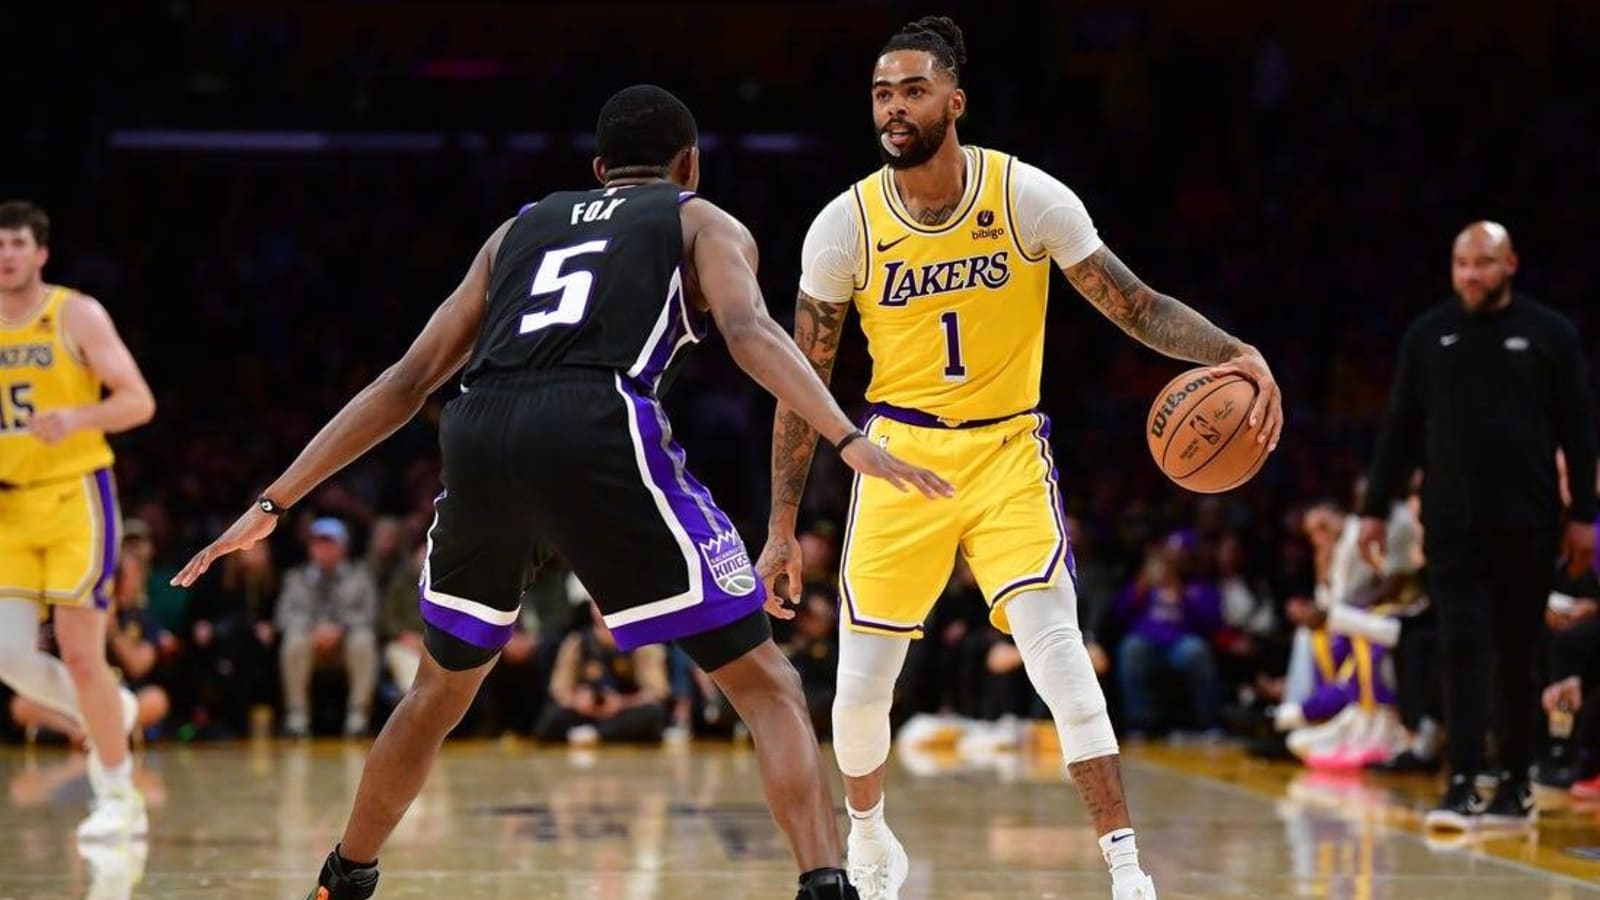 Missing major piece, Wolves try to bounce back vs. Lakers